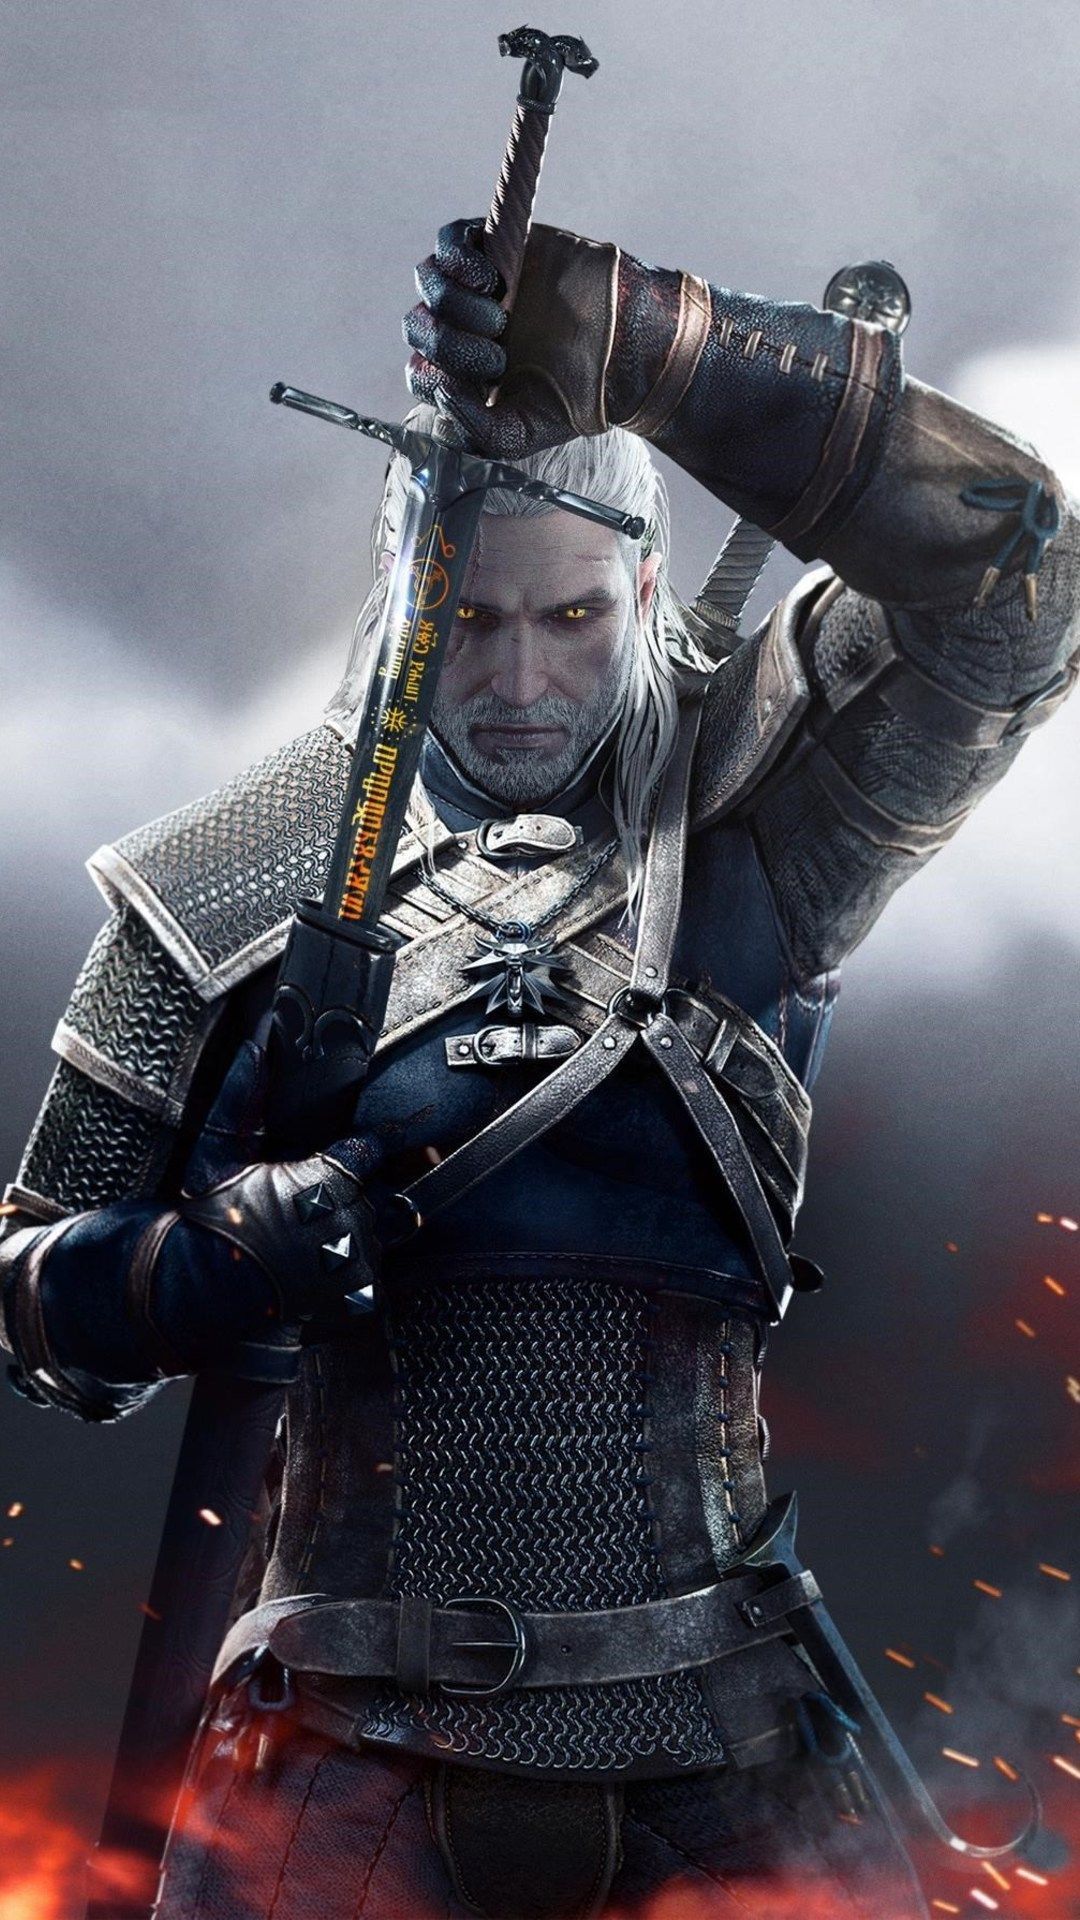 Witcher 3 Android Wallpaper Free .wallpaperaccess.com